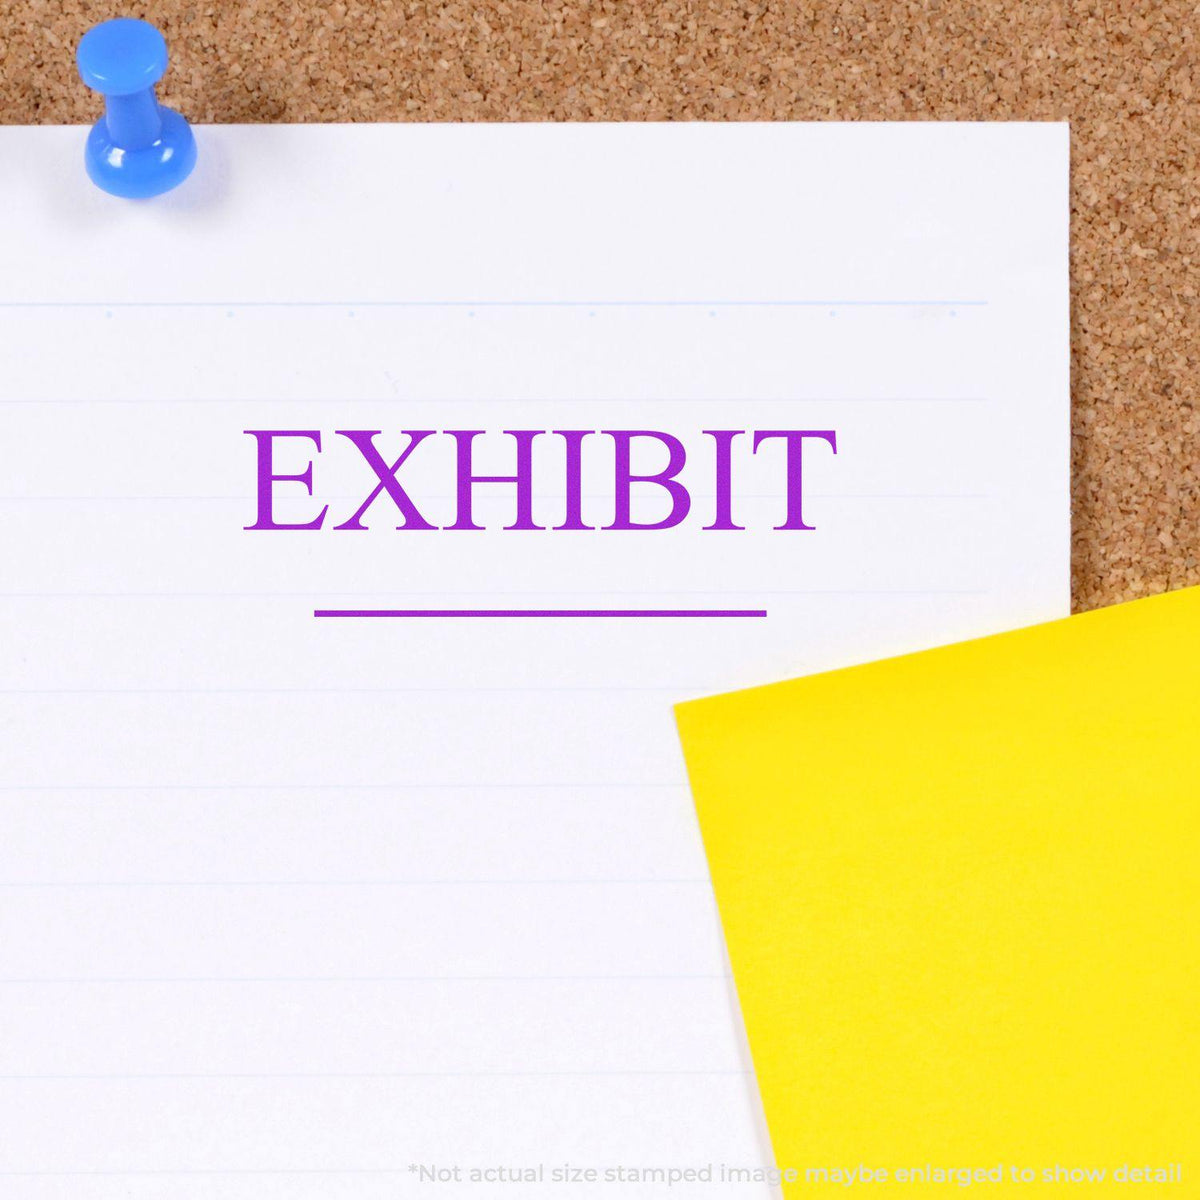 Exhibit Rubber Stamp In Use Photo